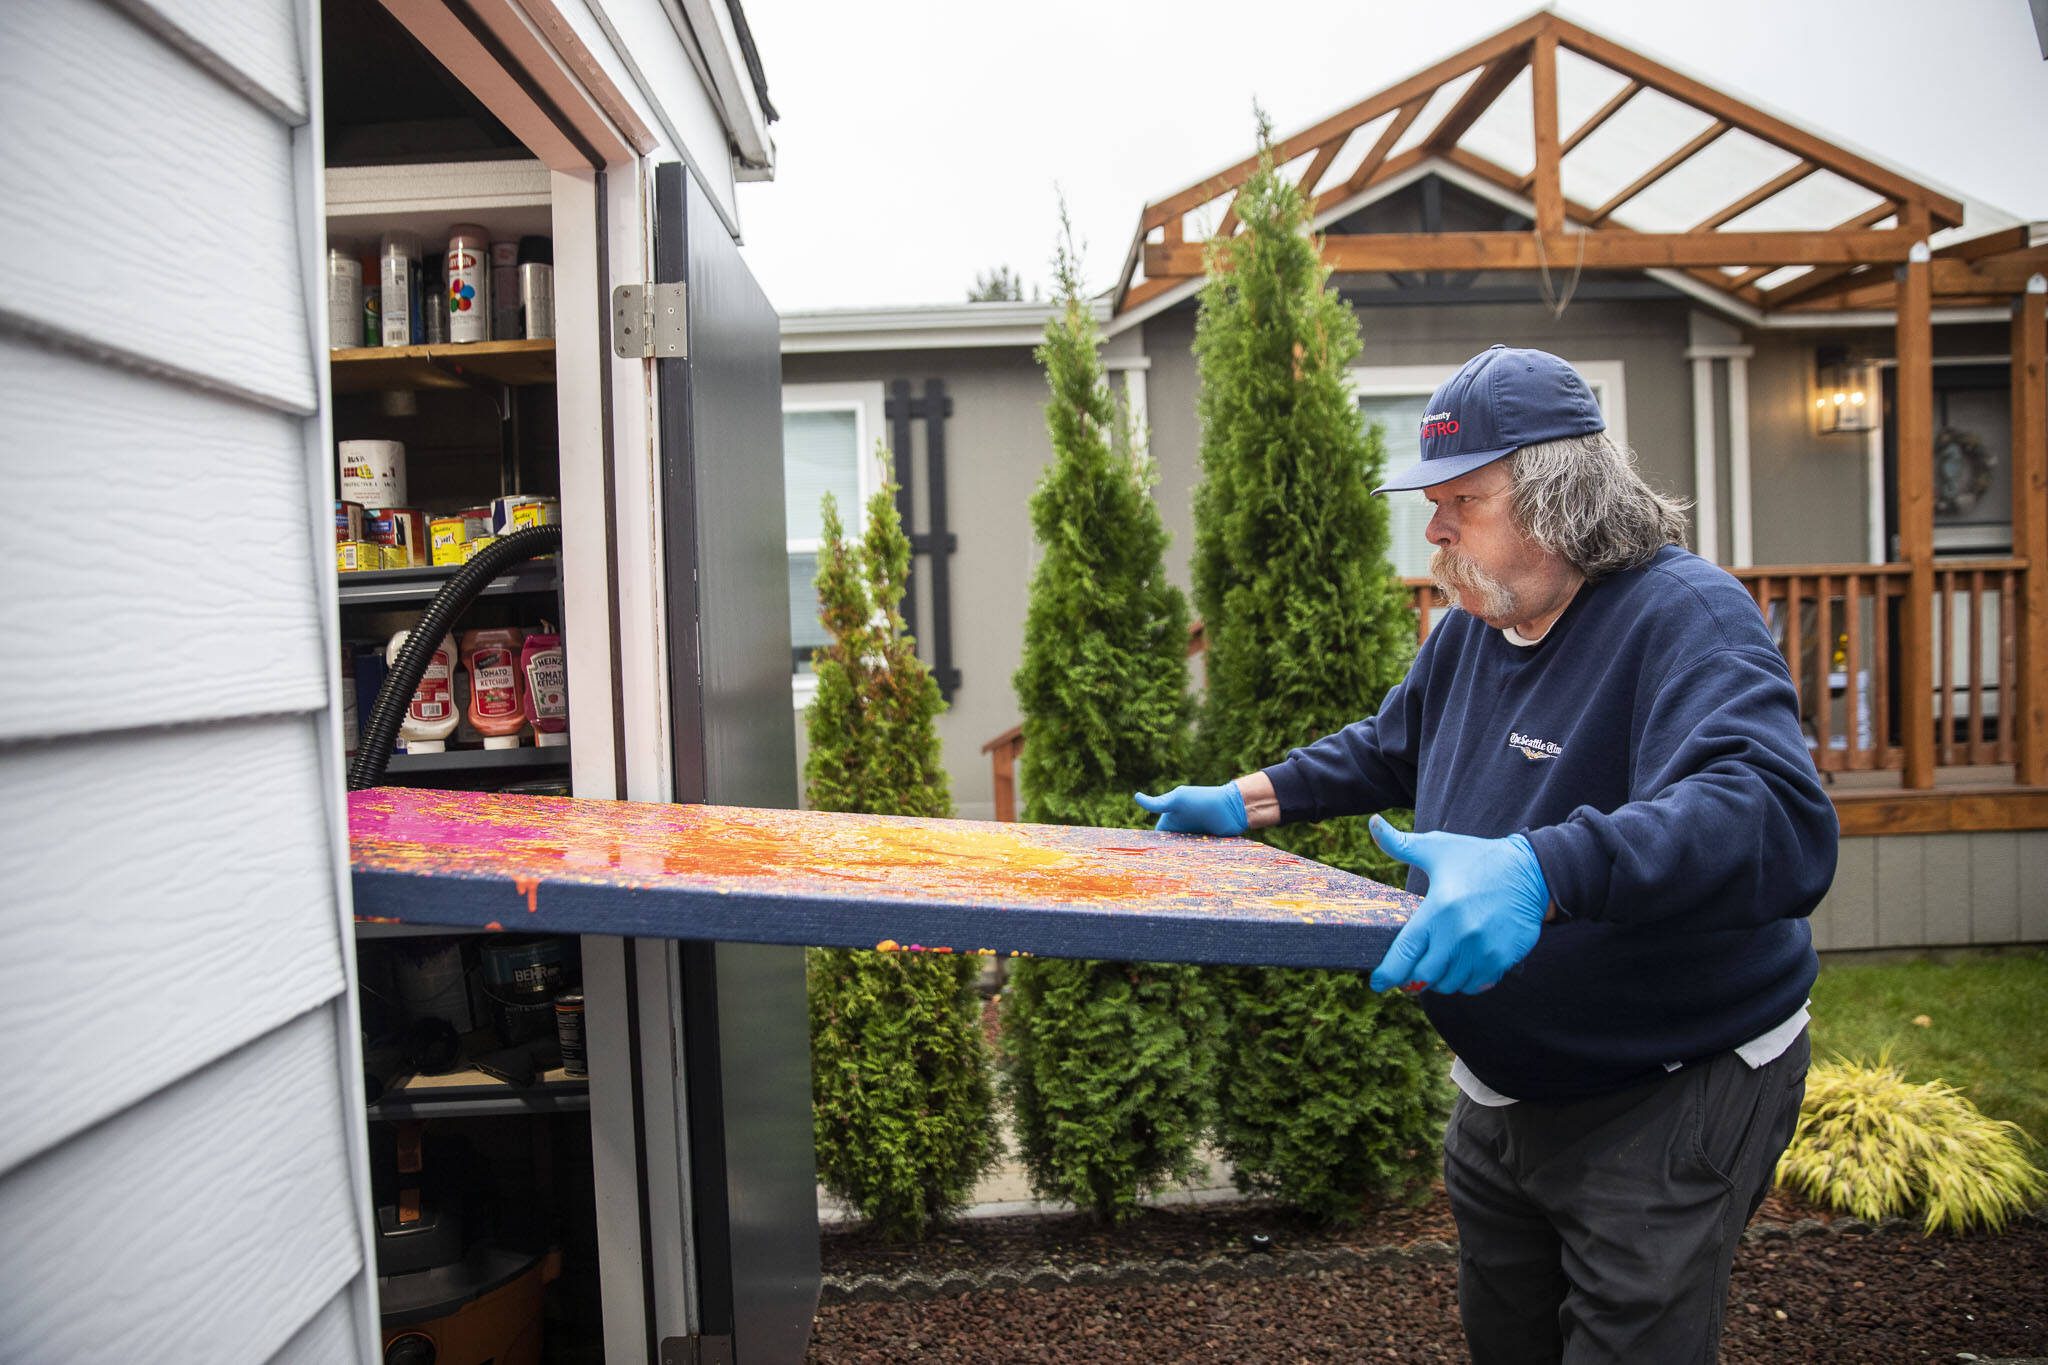 Sam Taylor carries a freshly painted canvas into his home workshop. (Olivia Vanni / The Herald)